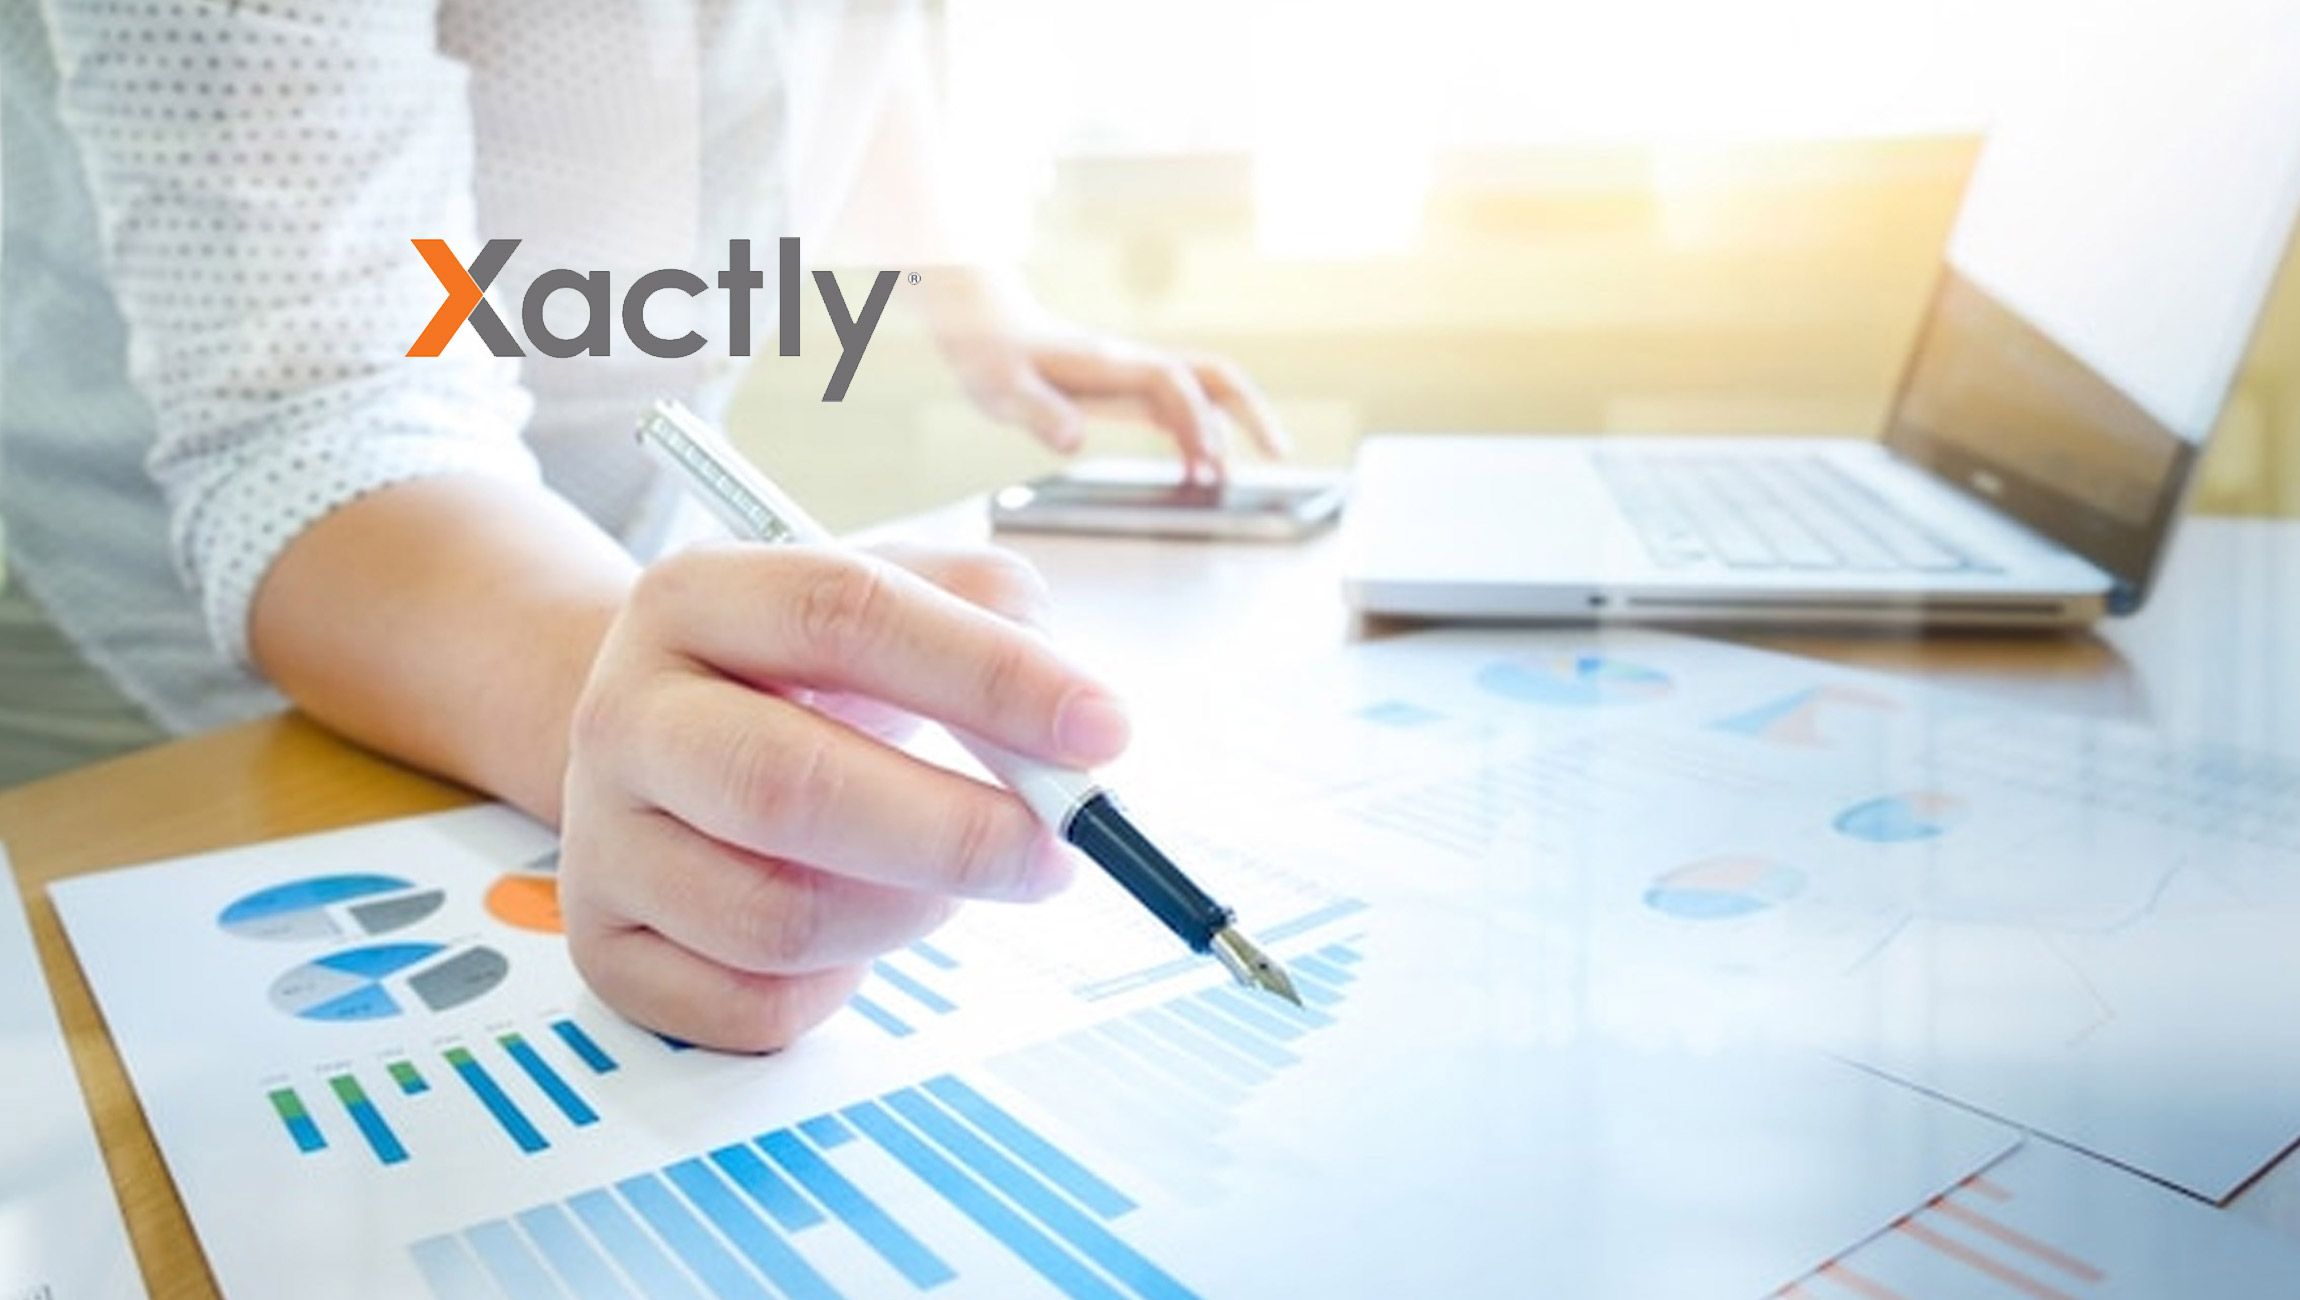 The Sales Talent Crisis: Xactly Releases Data on Sales Team Turnover and Retention Insights